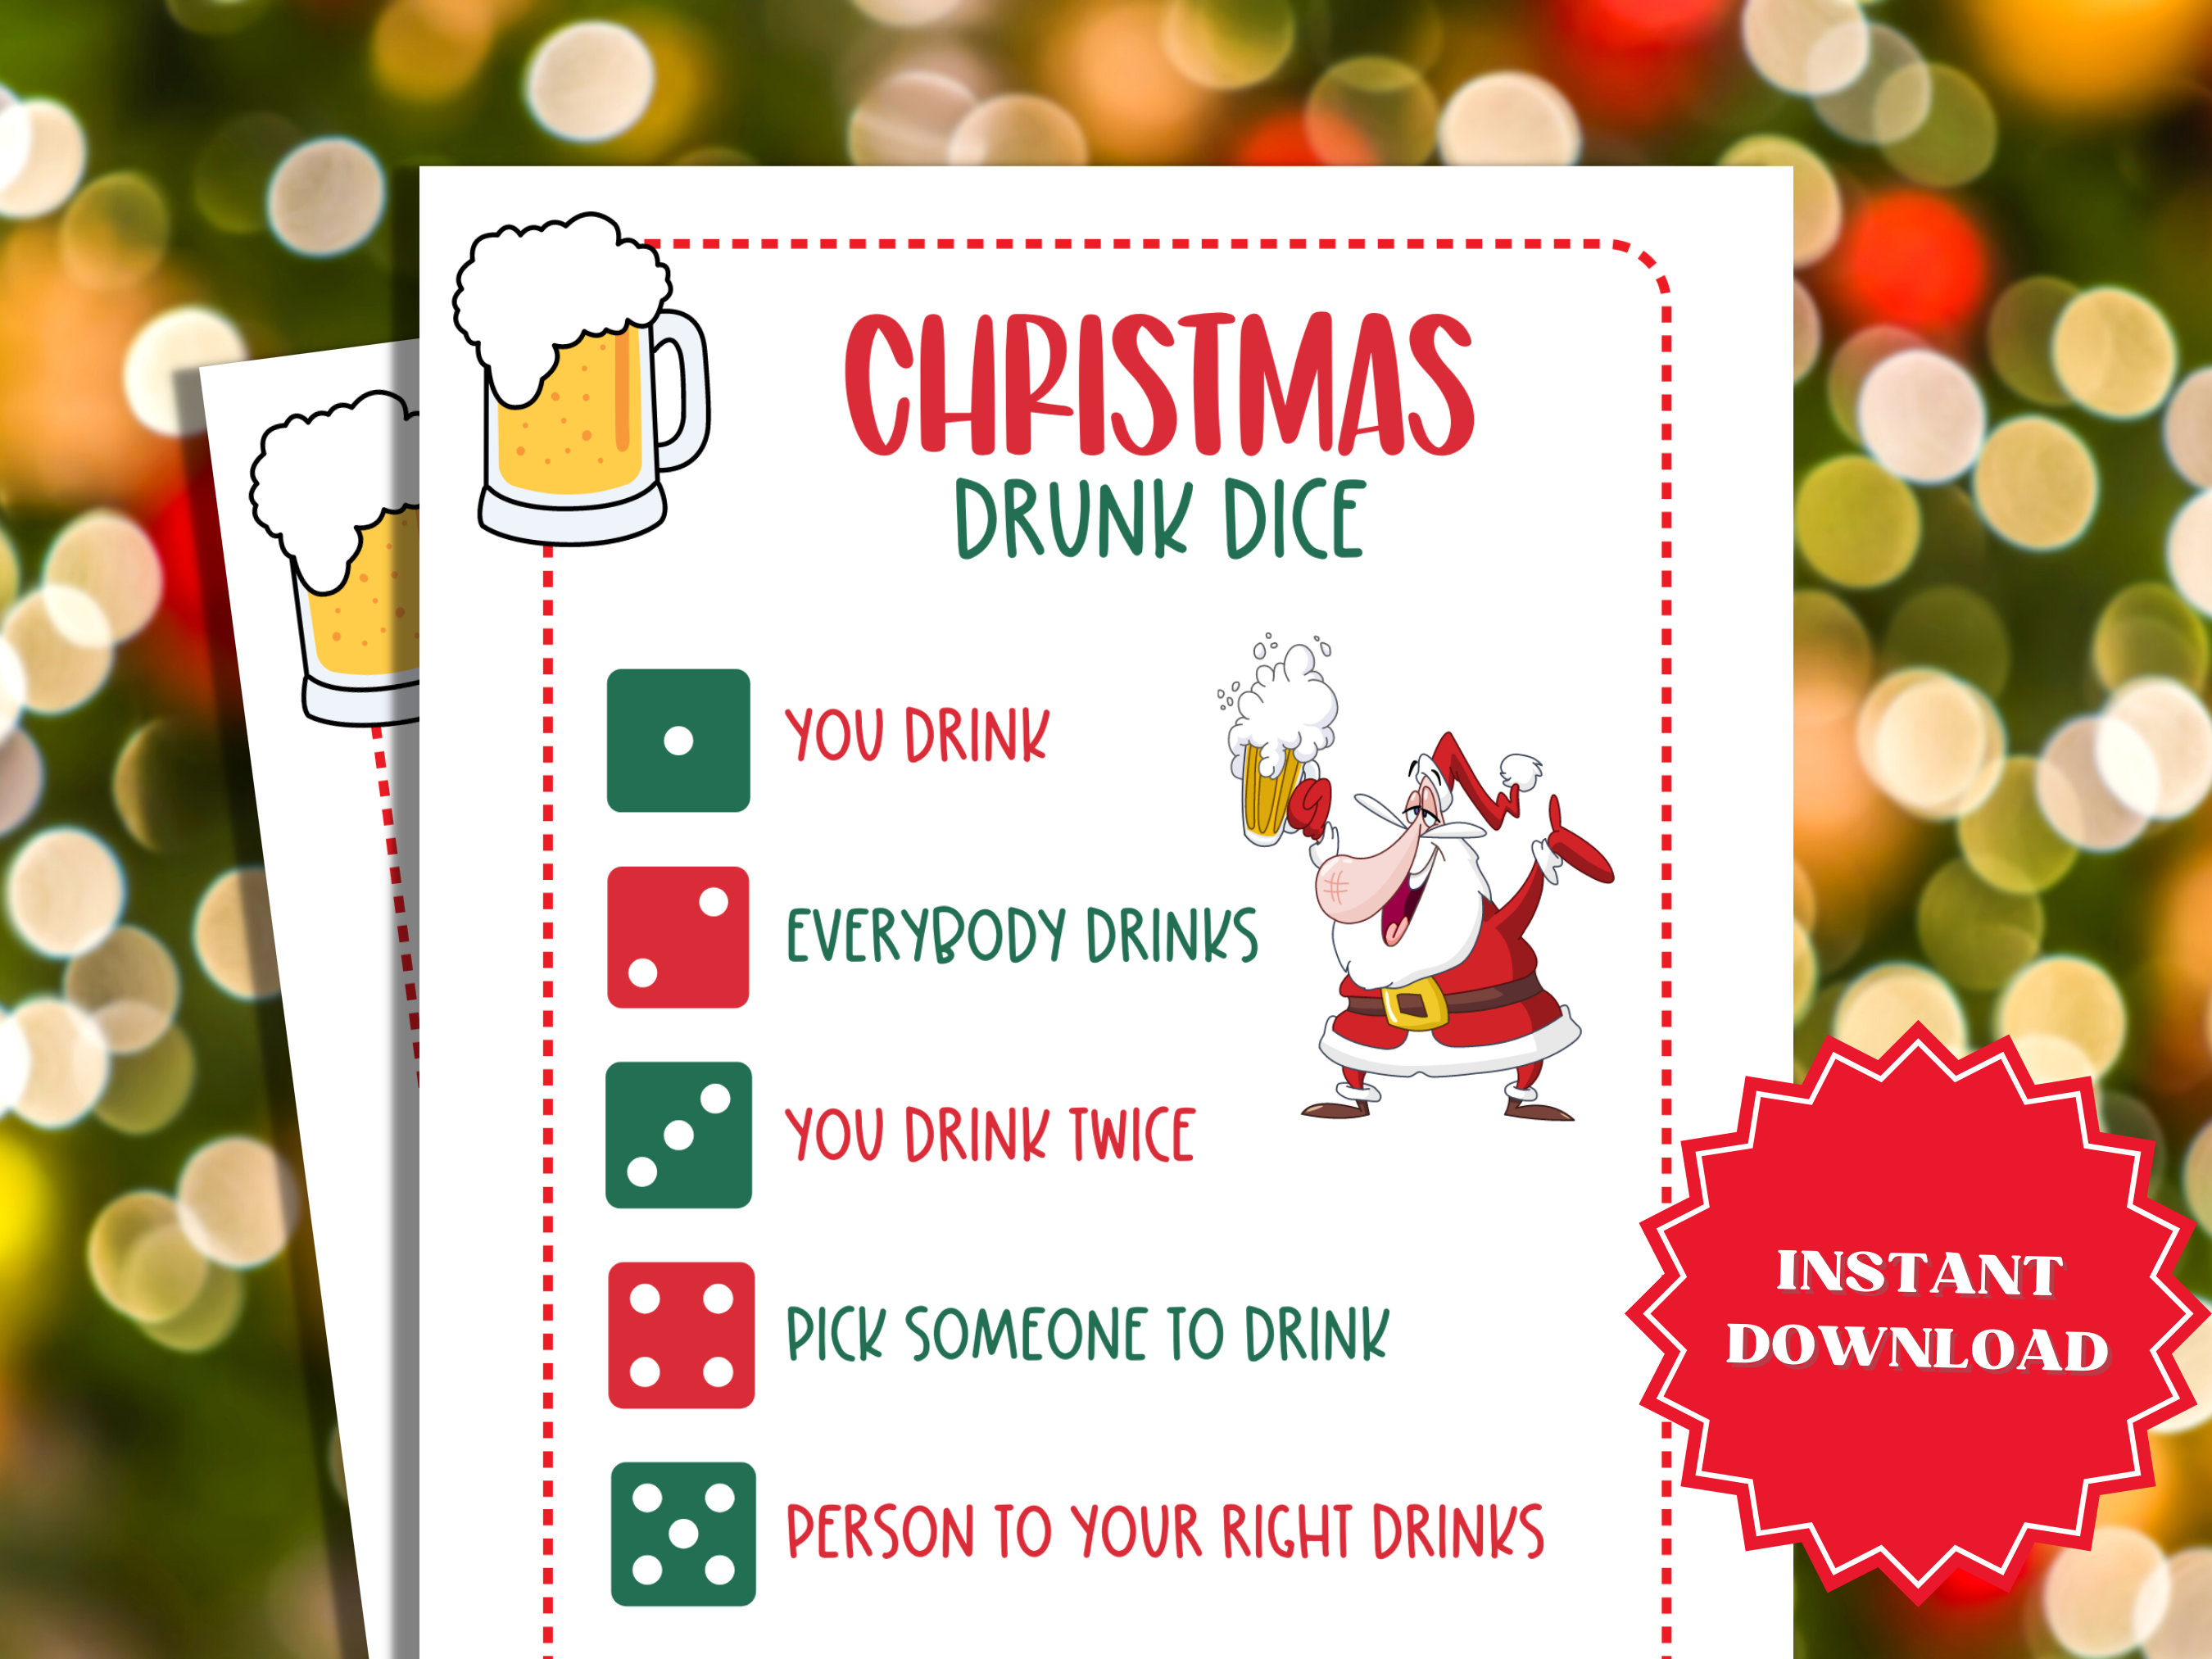 Taylor Swift Theme Dice Drinking Party Game 